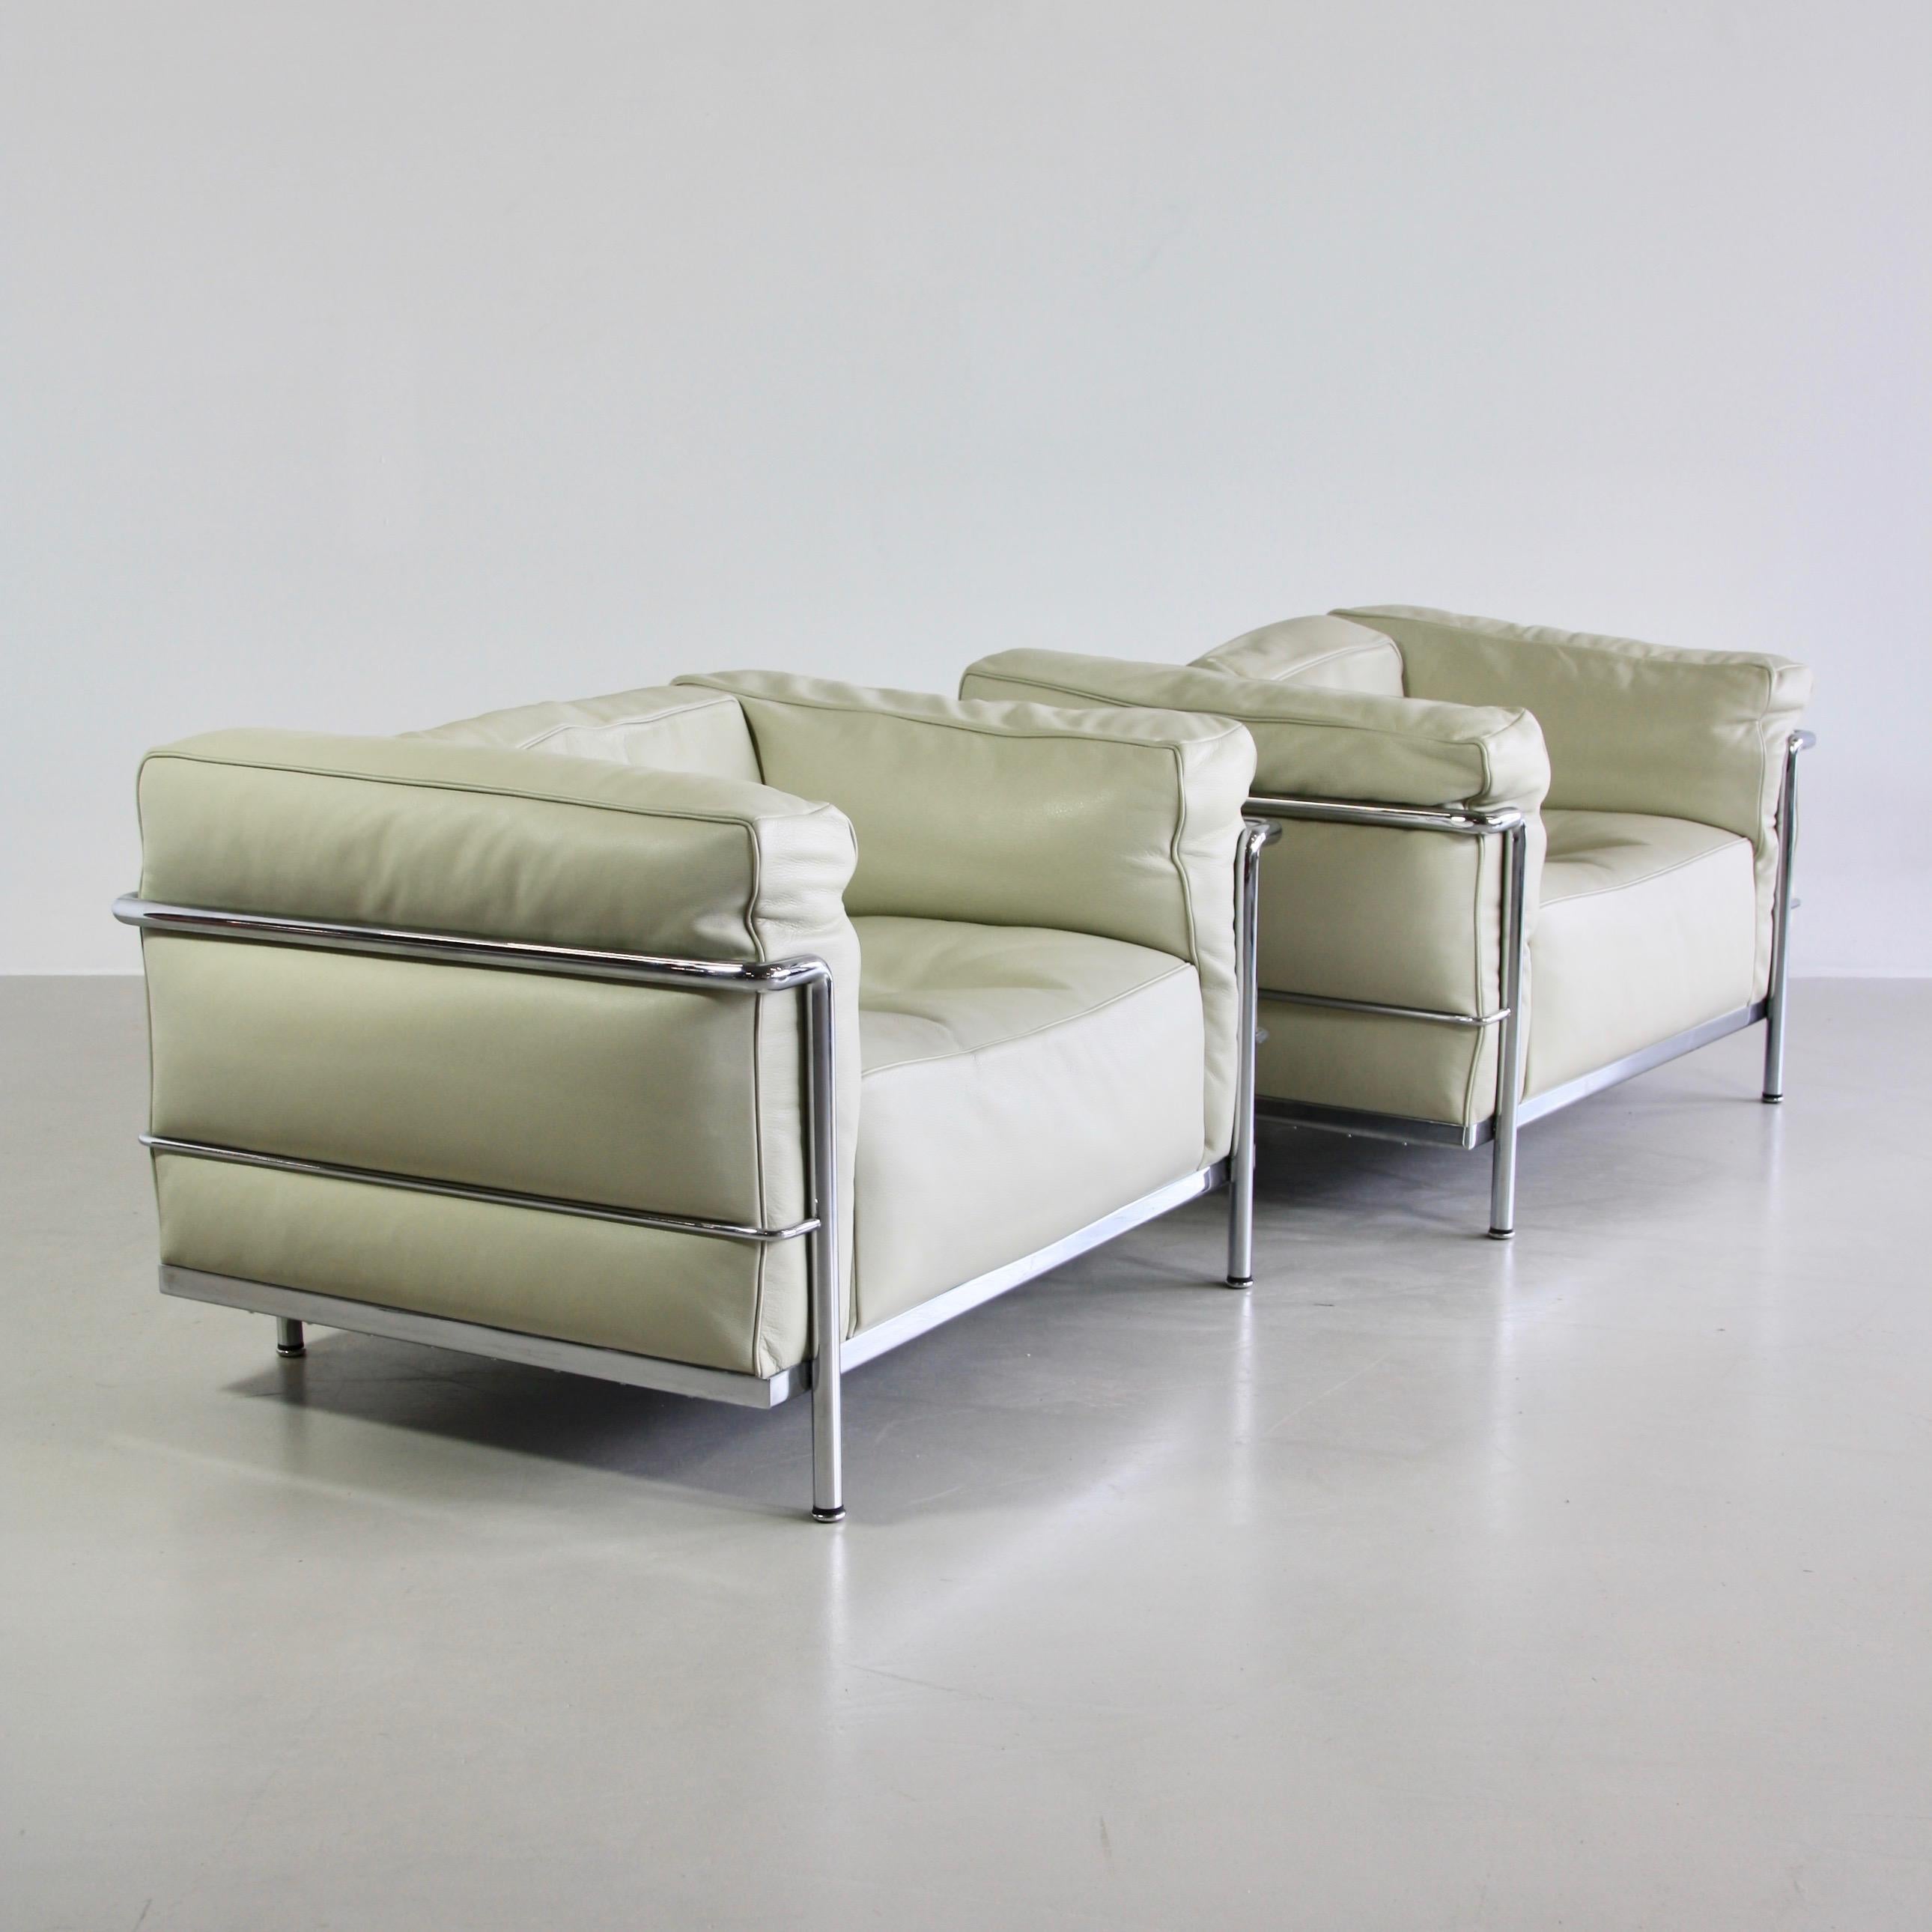 Modern Pair of Lounge Chairs LC3 by LE Corbusier, Jeanneret & Perriand, Cassina